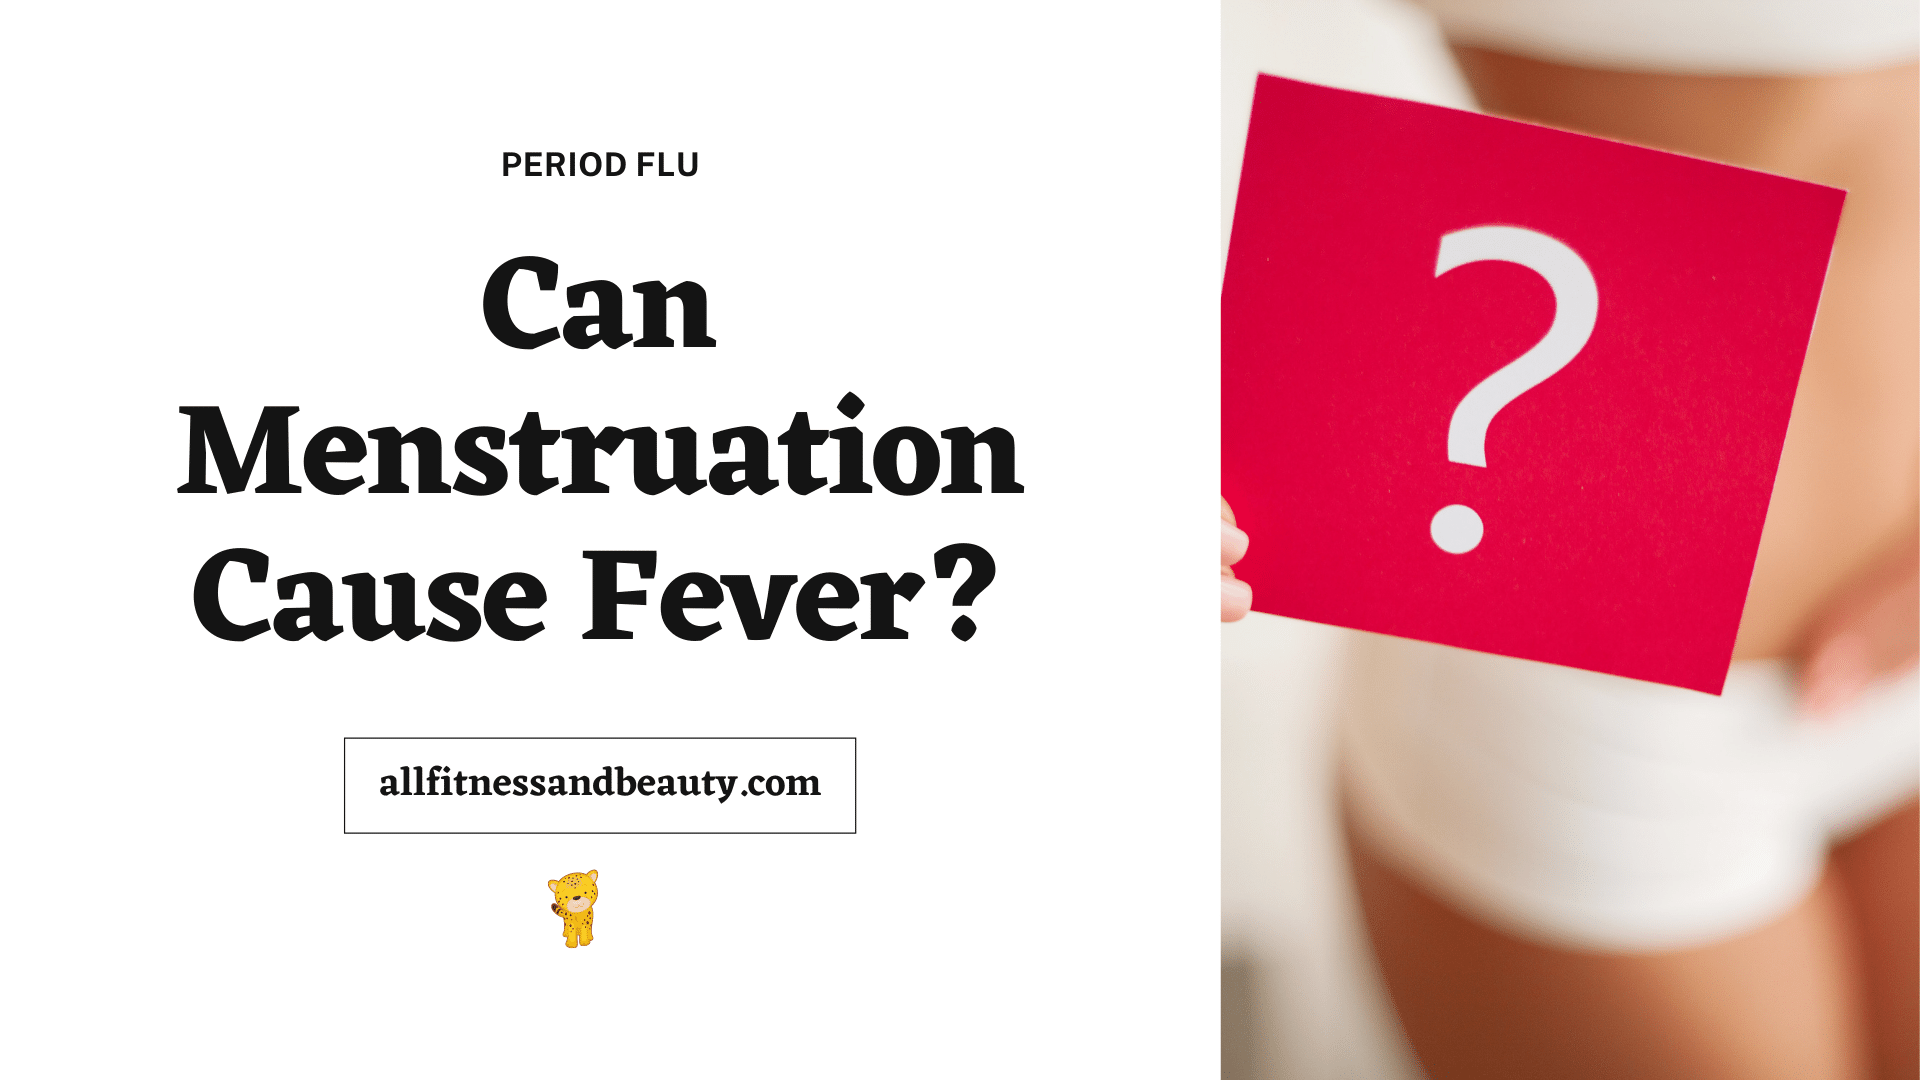 Can Menstruation Cause Fever